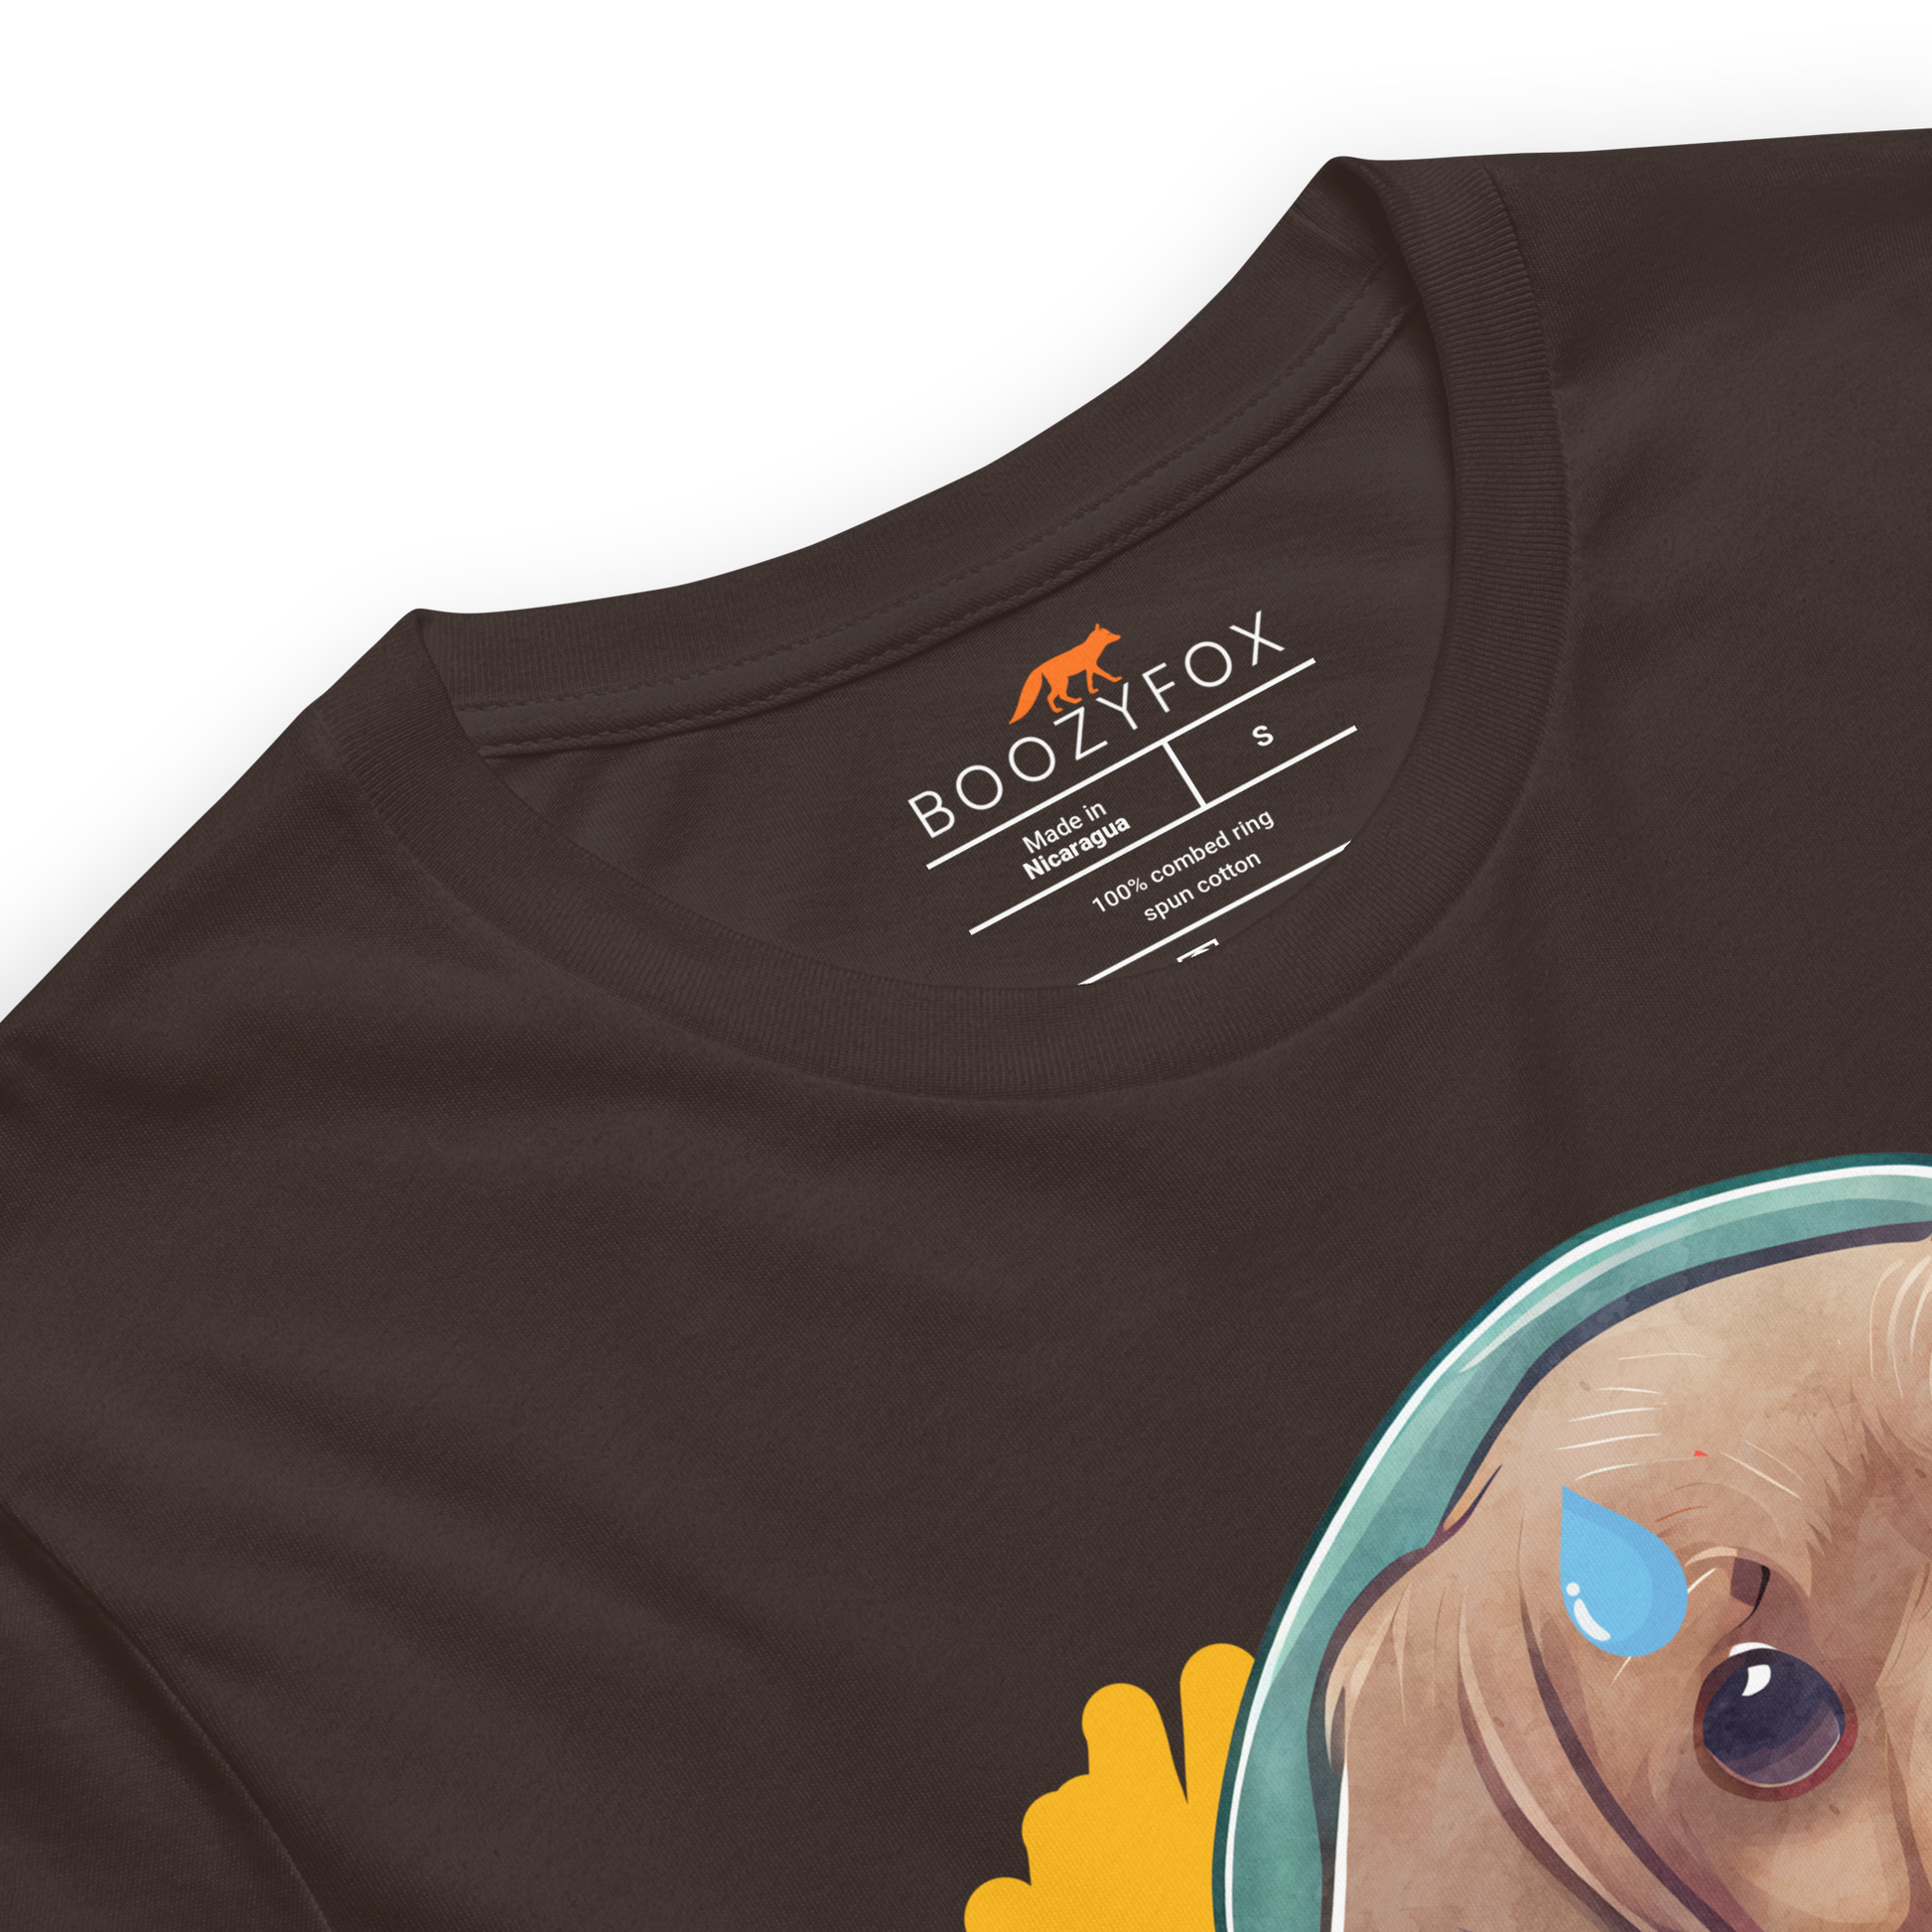 Product details of a Brown Premium Sausage Dog T-Shirt featuring an adorable sausage roll dachshund graphic on the chest - Cute Graphic Dachshund  Tees - Boozy Fox